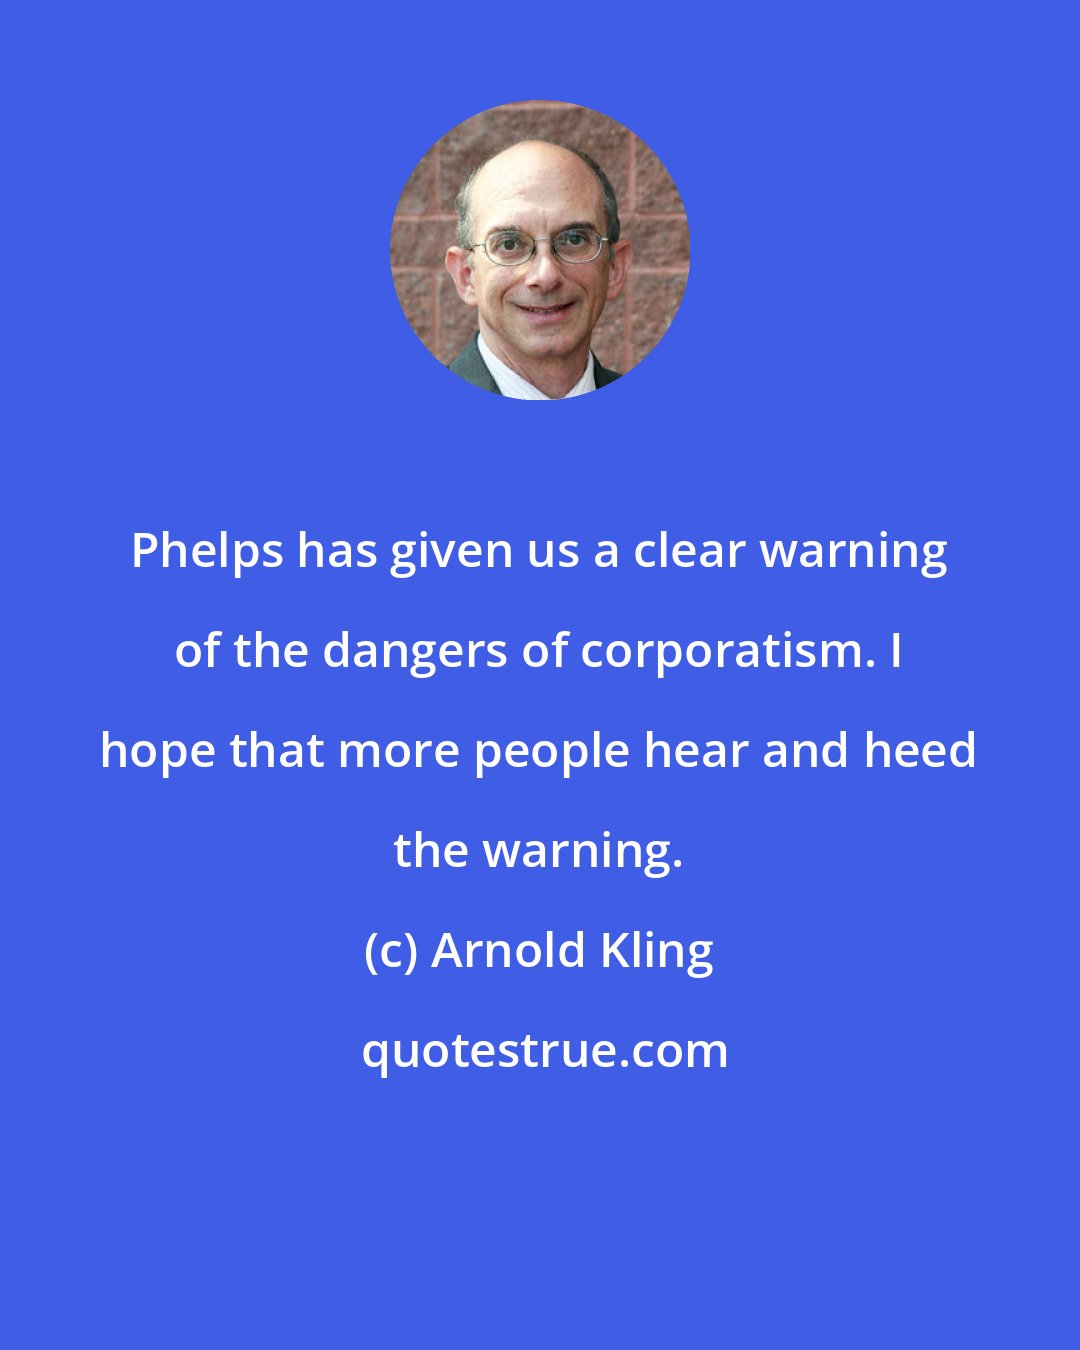 Arnold Kling: Phelps has given us a clear warning of the dangers of corporatism. I hope that more people hear and heed the warning.